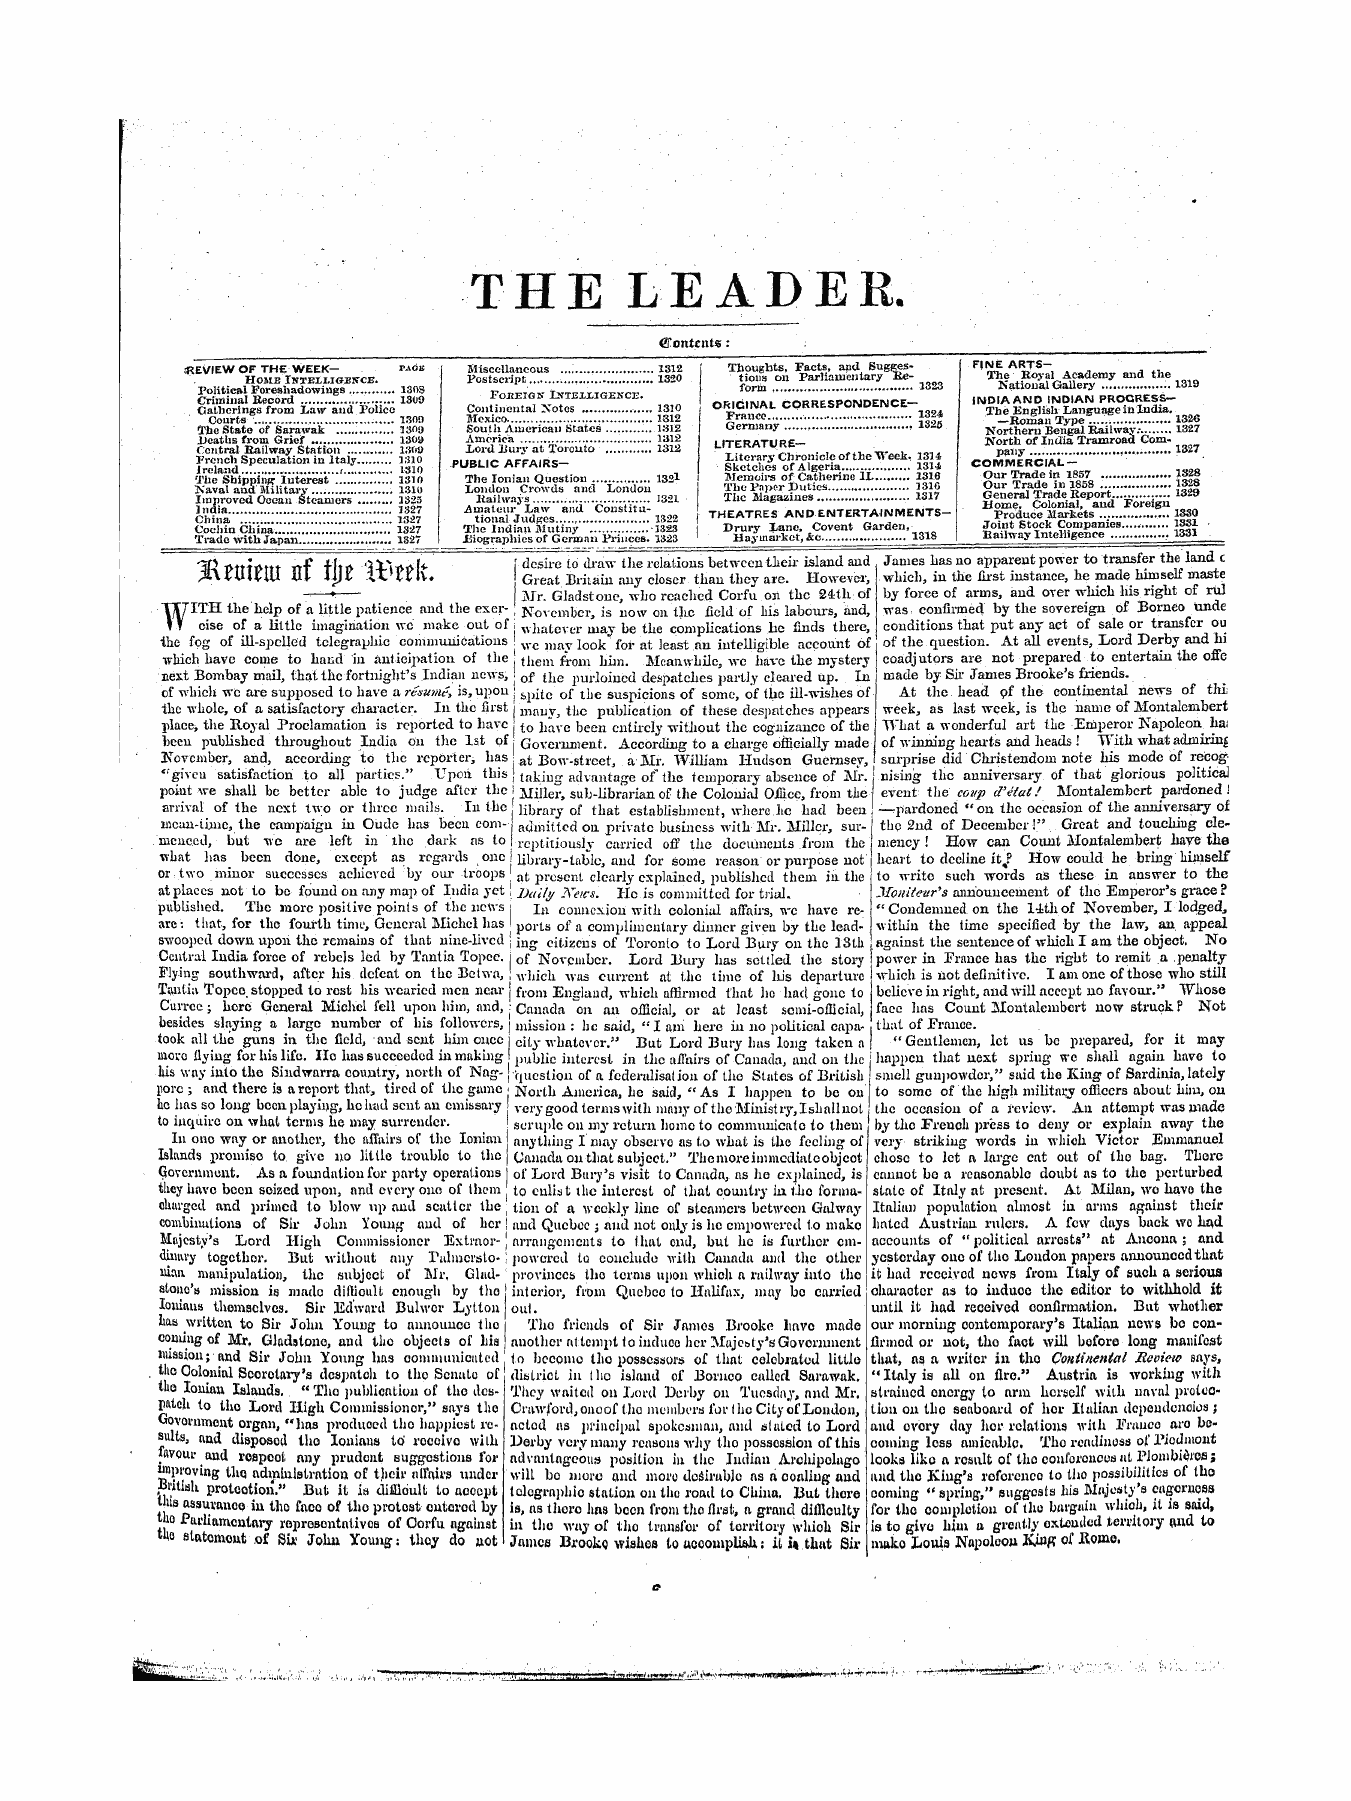 Leader (1850-1860): jS F Y, 1st edition: 3